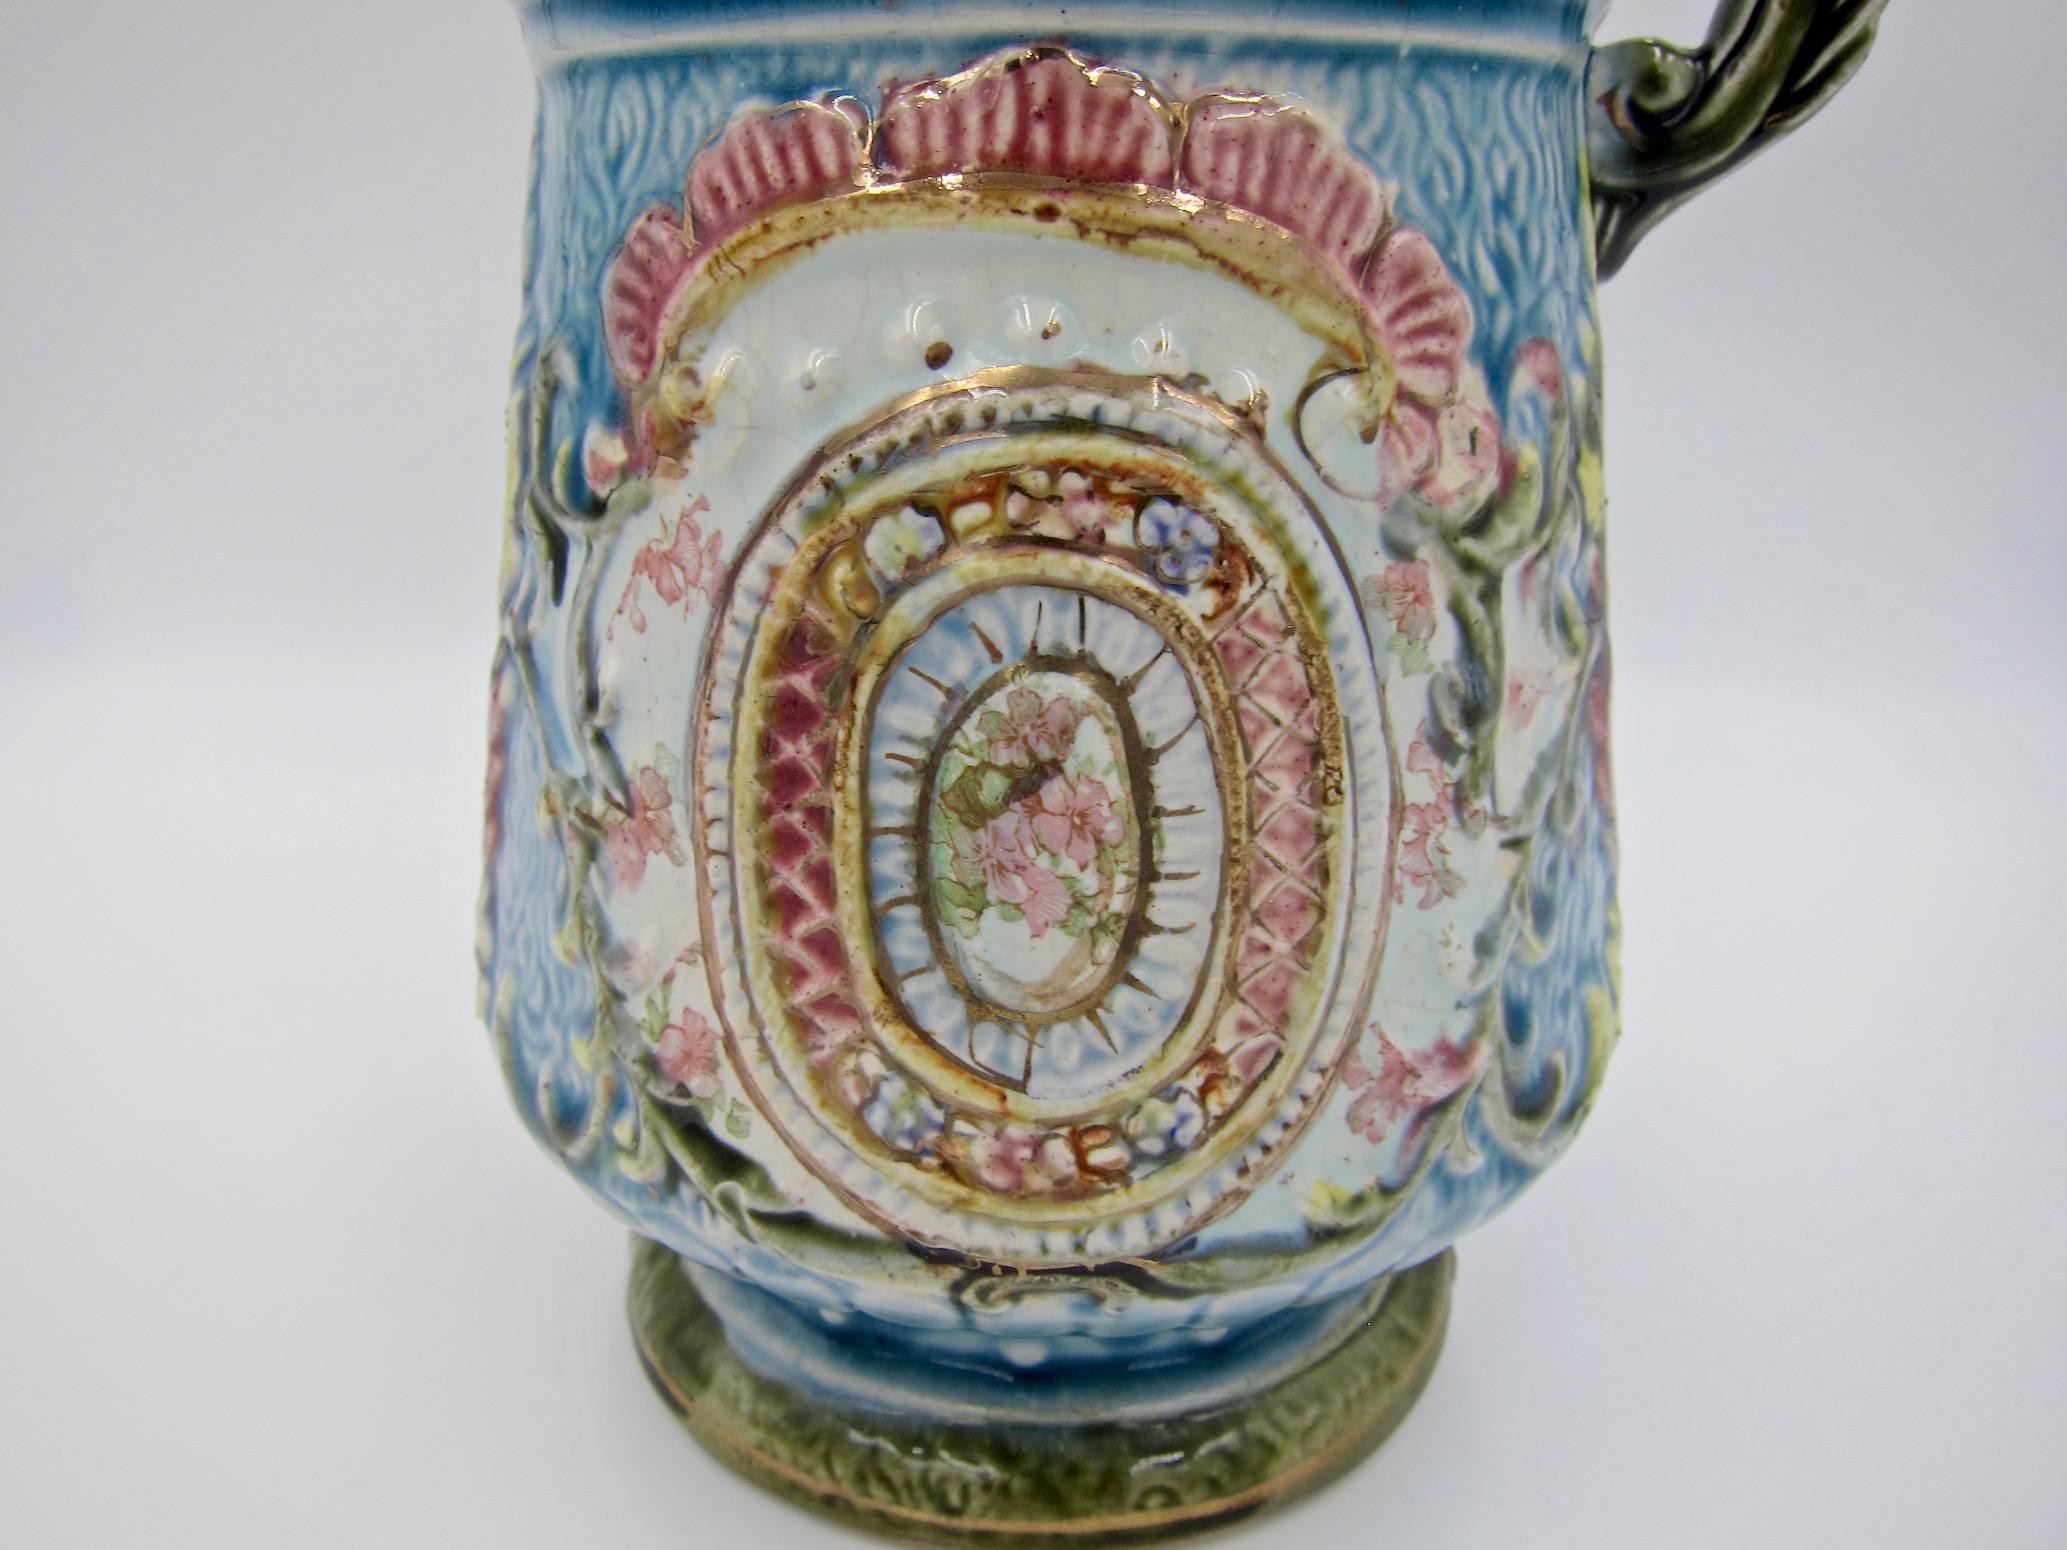 Glazed Antique Continental Hand-Painted Majolica Pitcher Vase